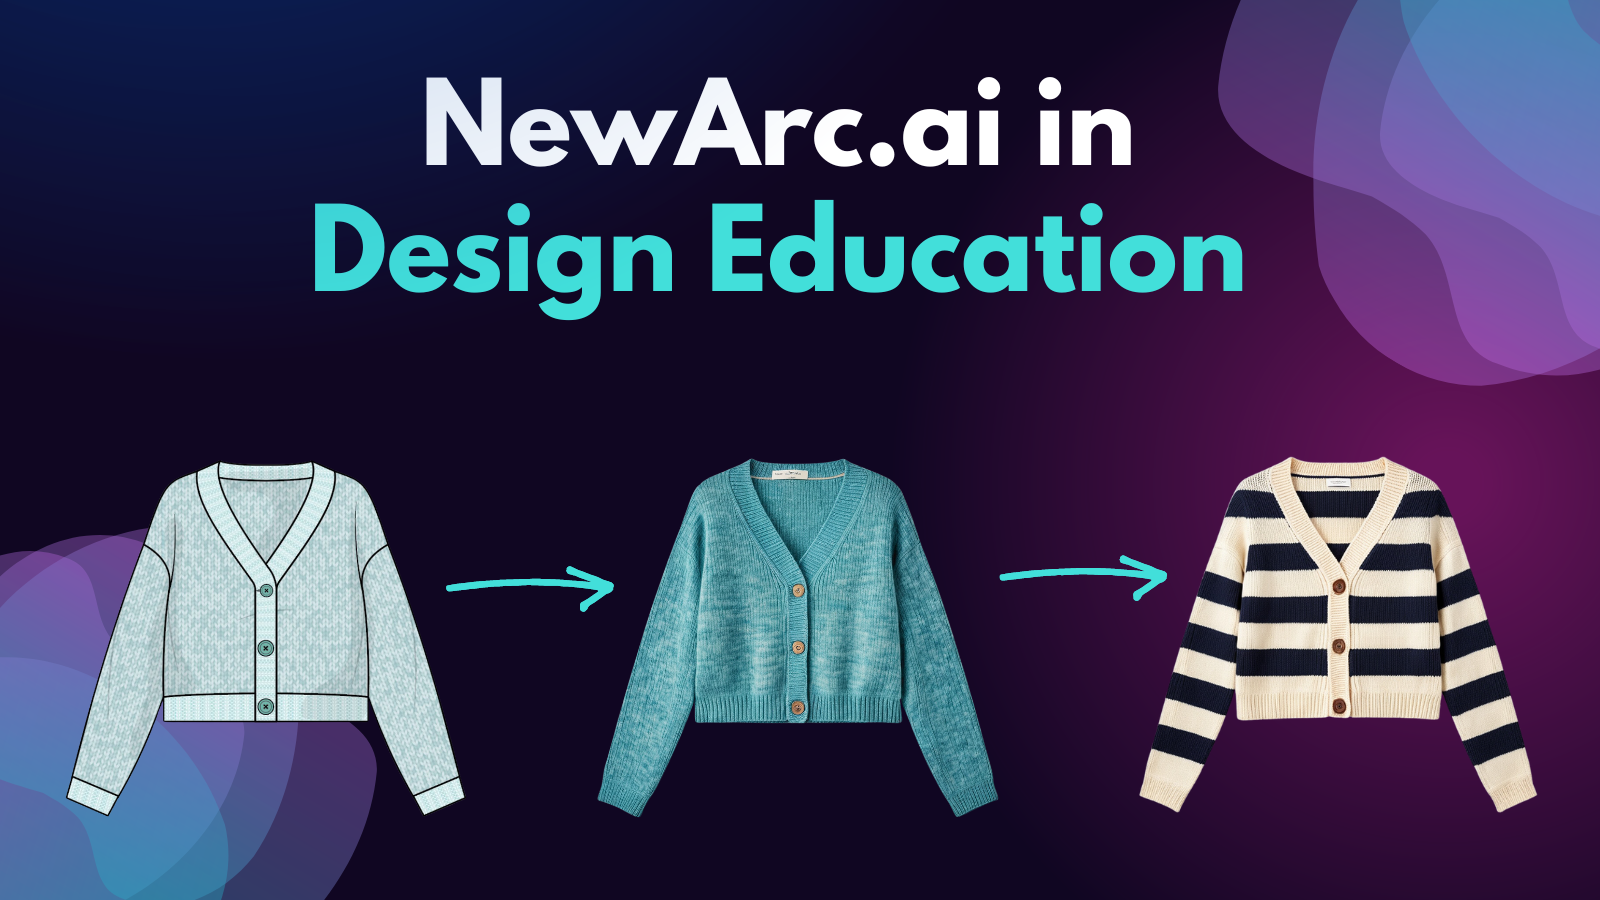 Bridging the Gap: How NewArc.ai is Changing Design Education